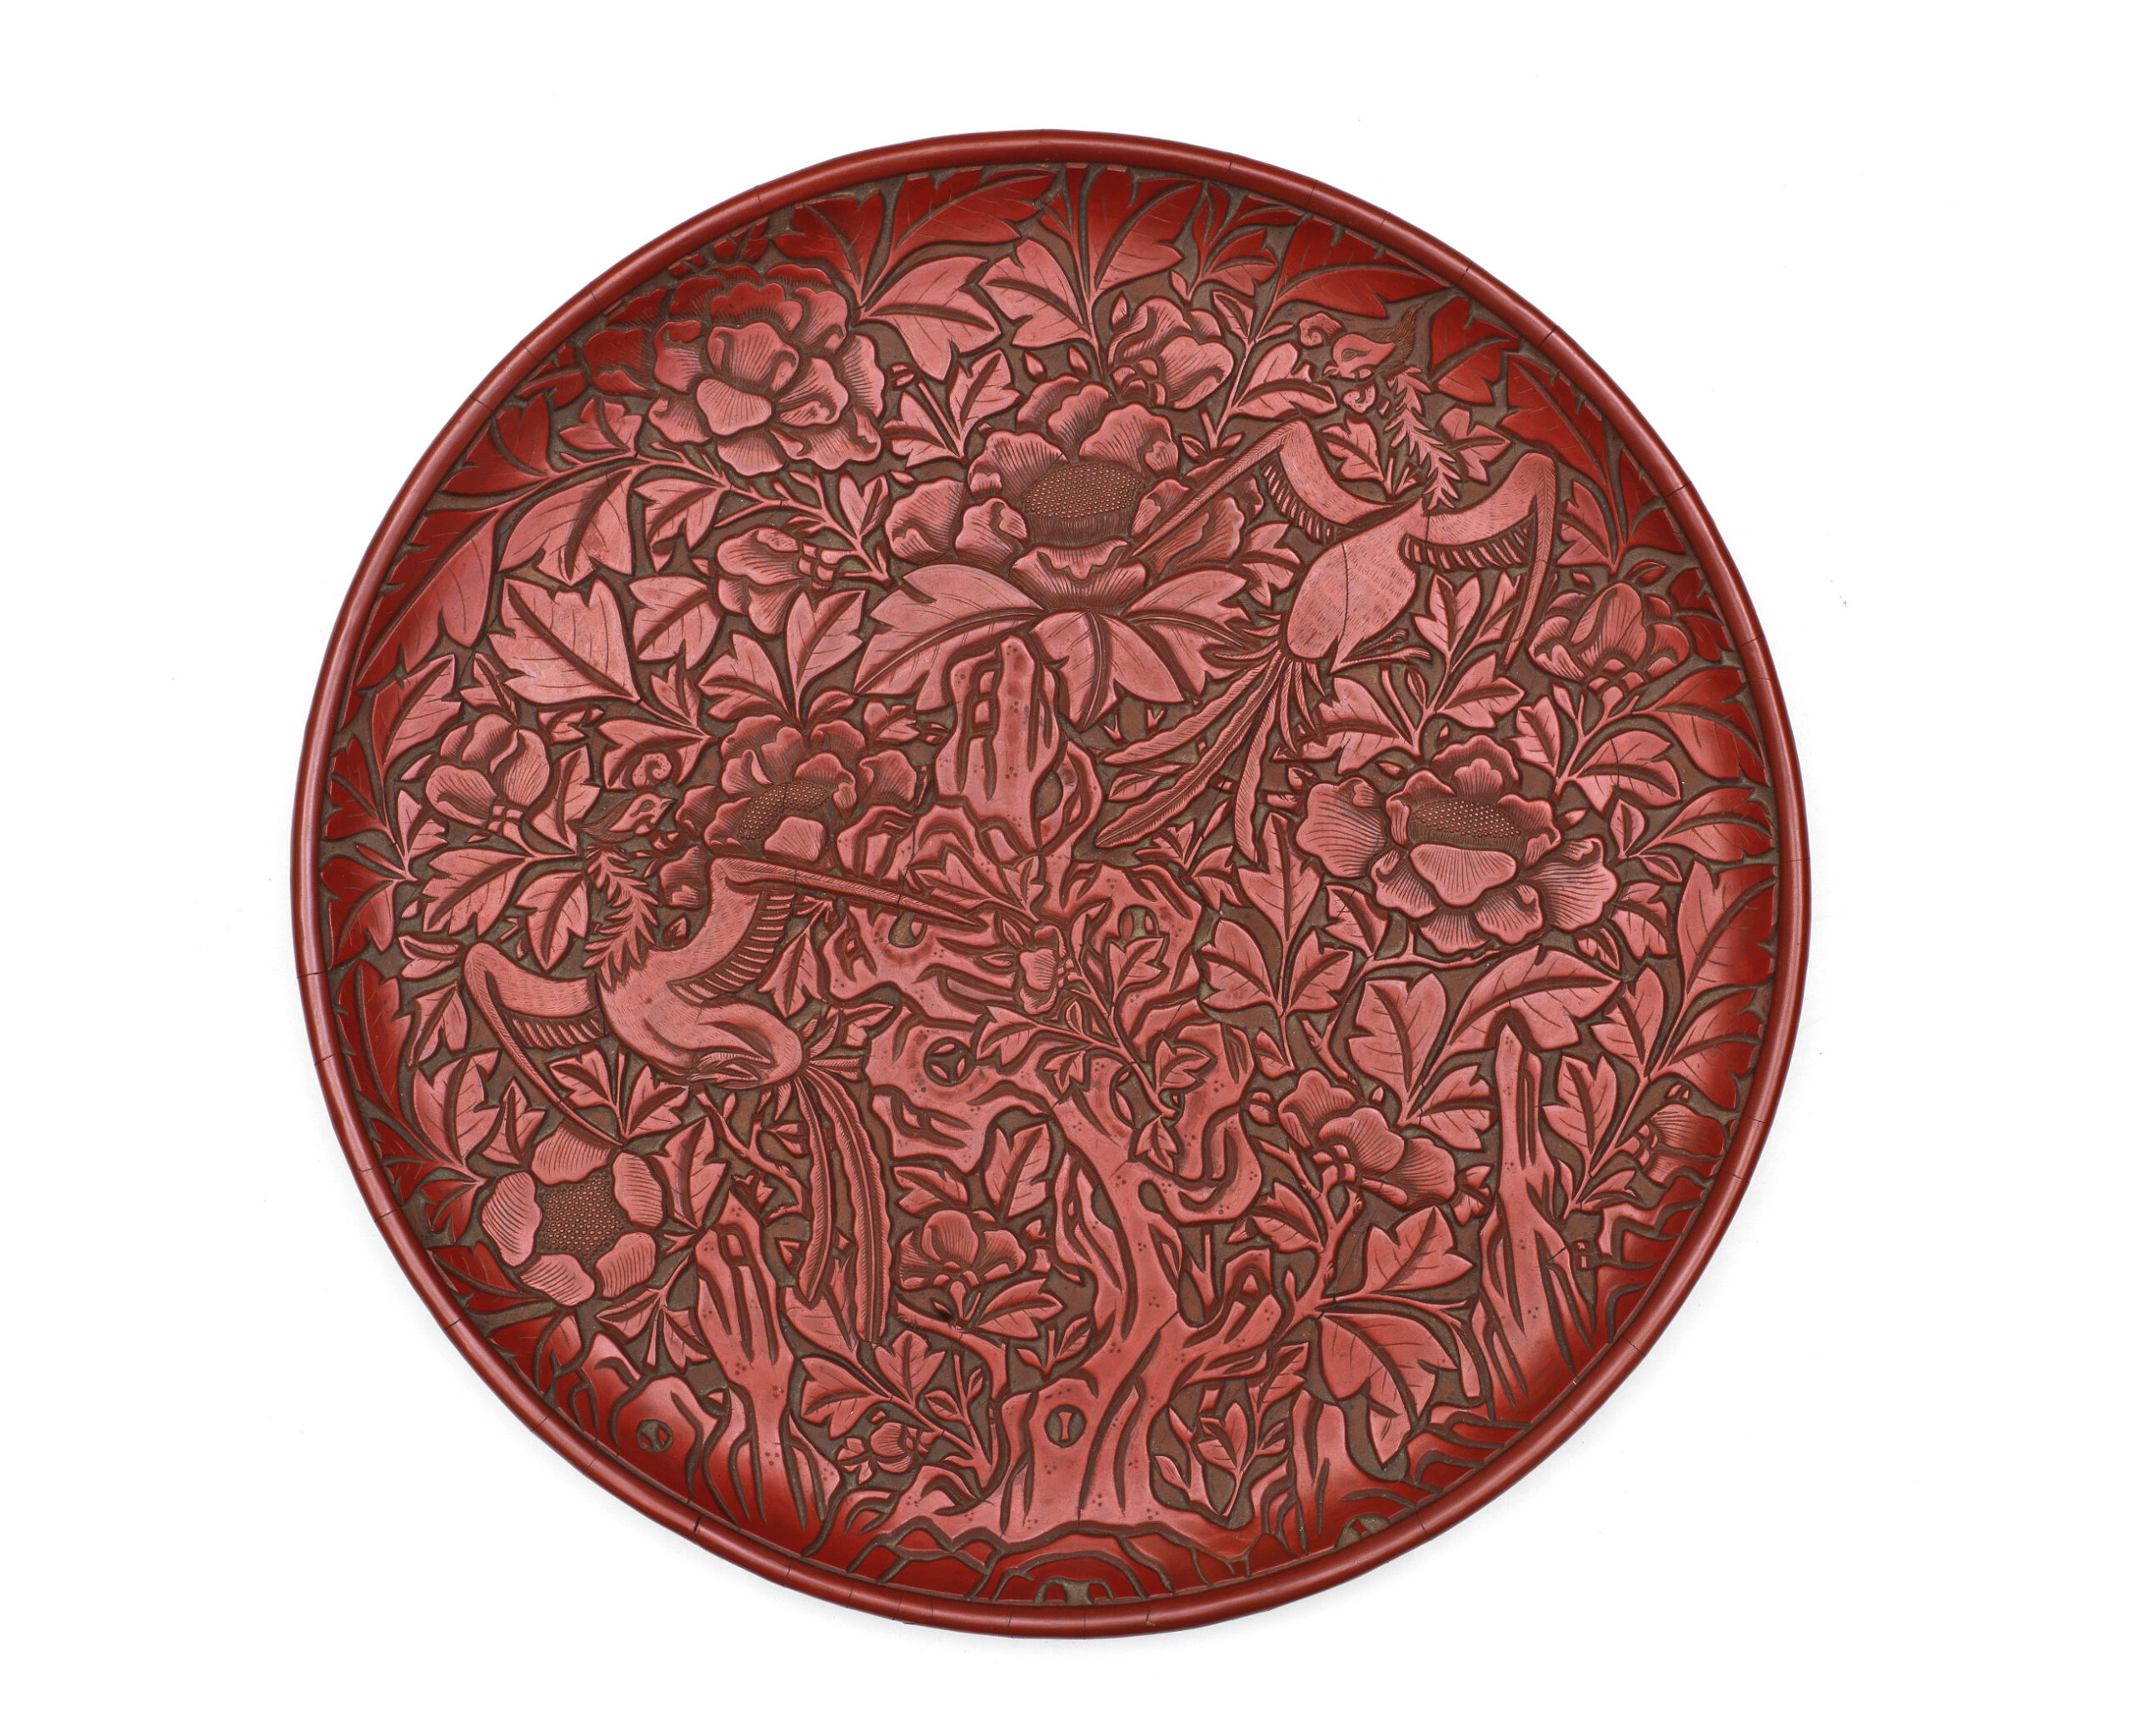 An exceptionally rare large cinnabar lacquer 'phoenix and peony' dish, 14th century, lot 98, Fine Chinese Art, 12 May